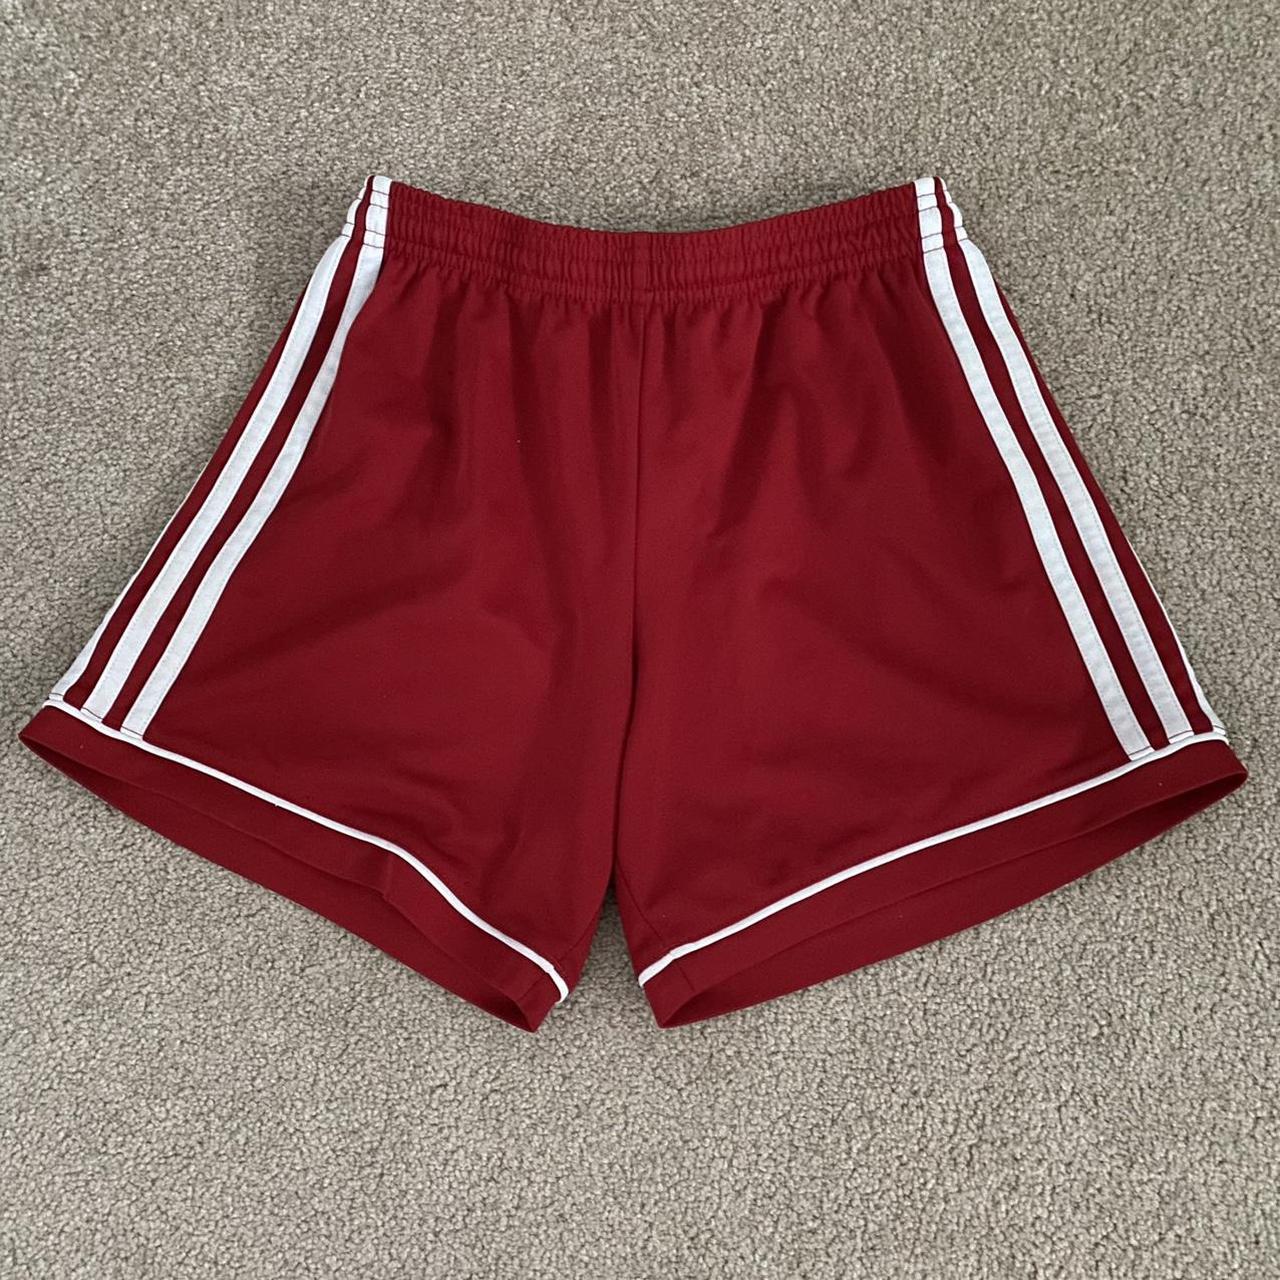 Adidas Women's Red Shorts